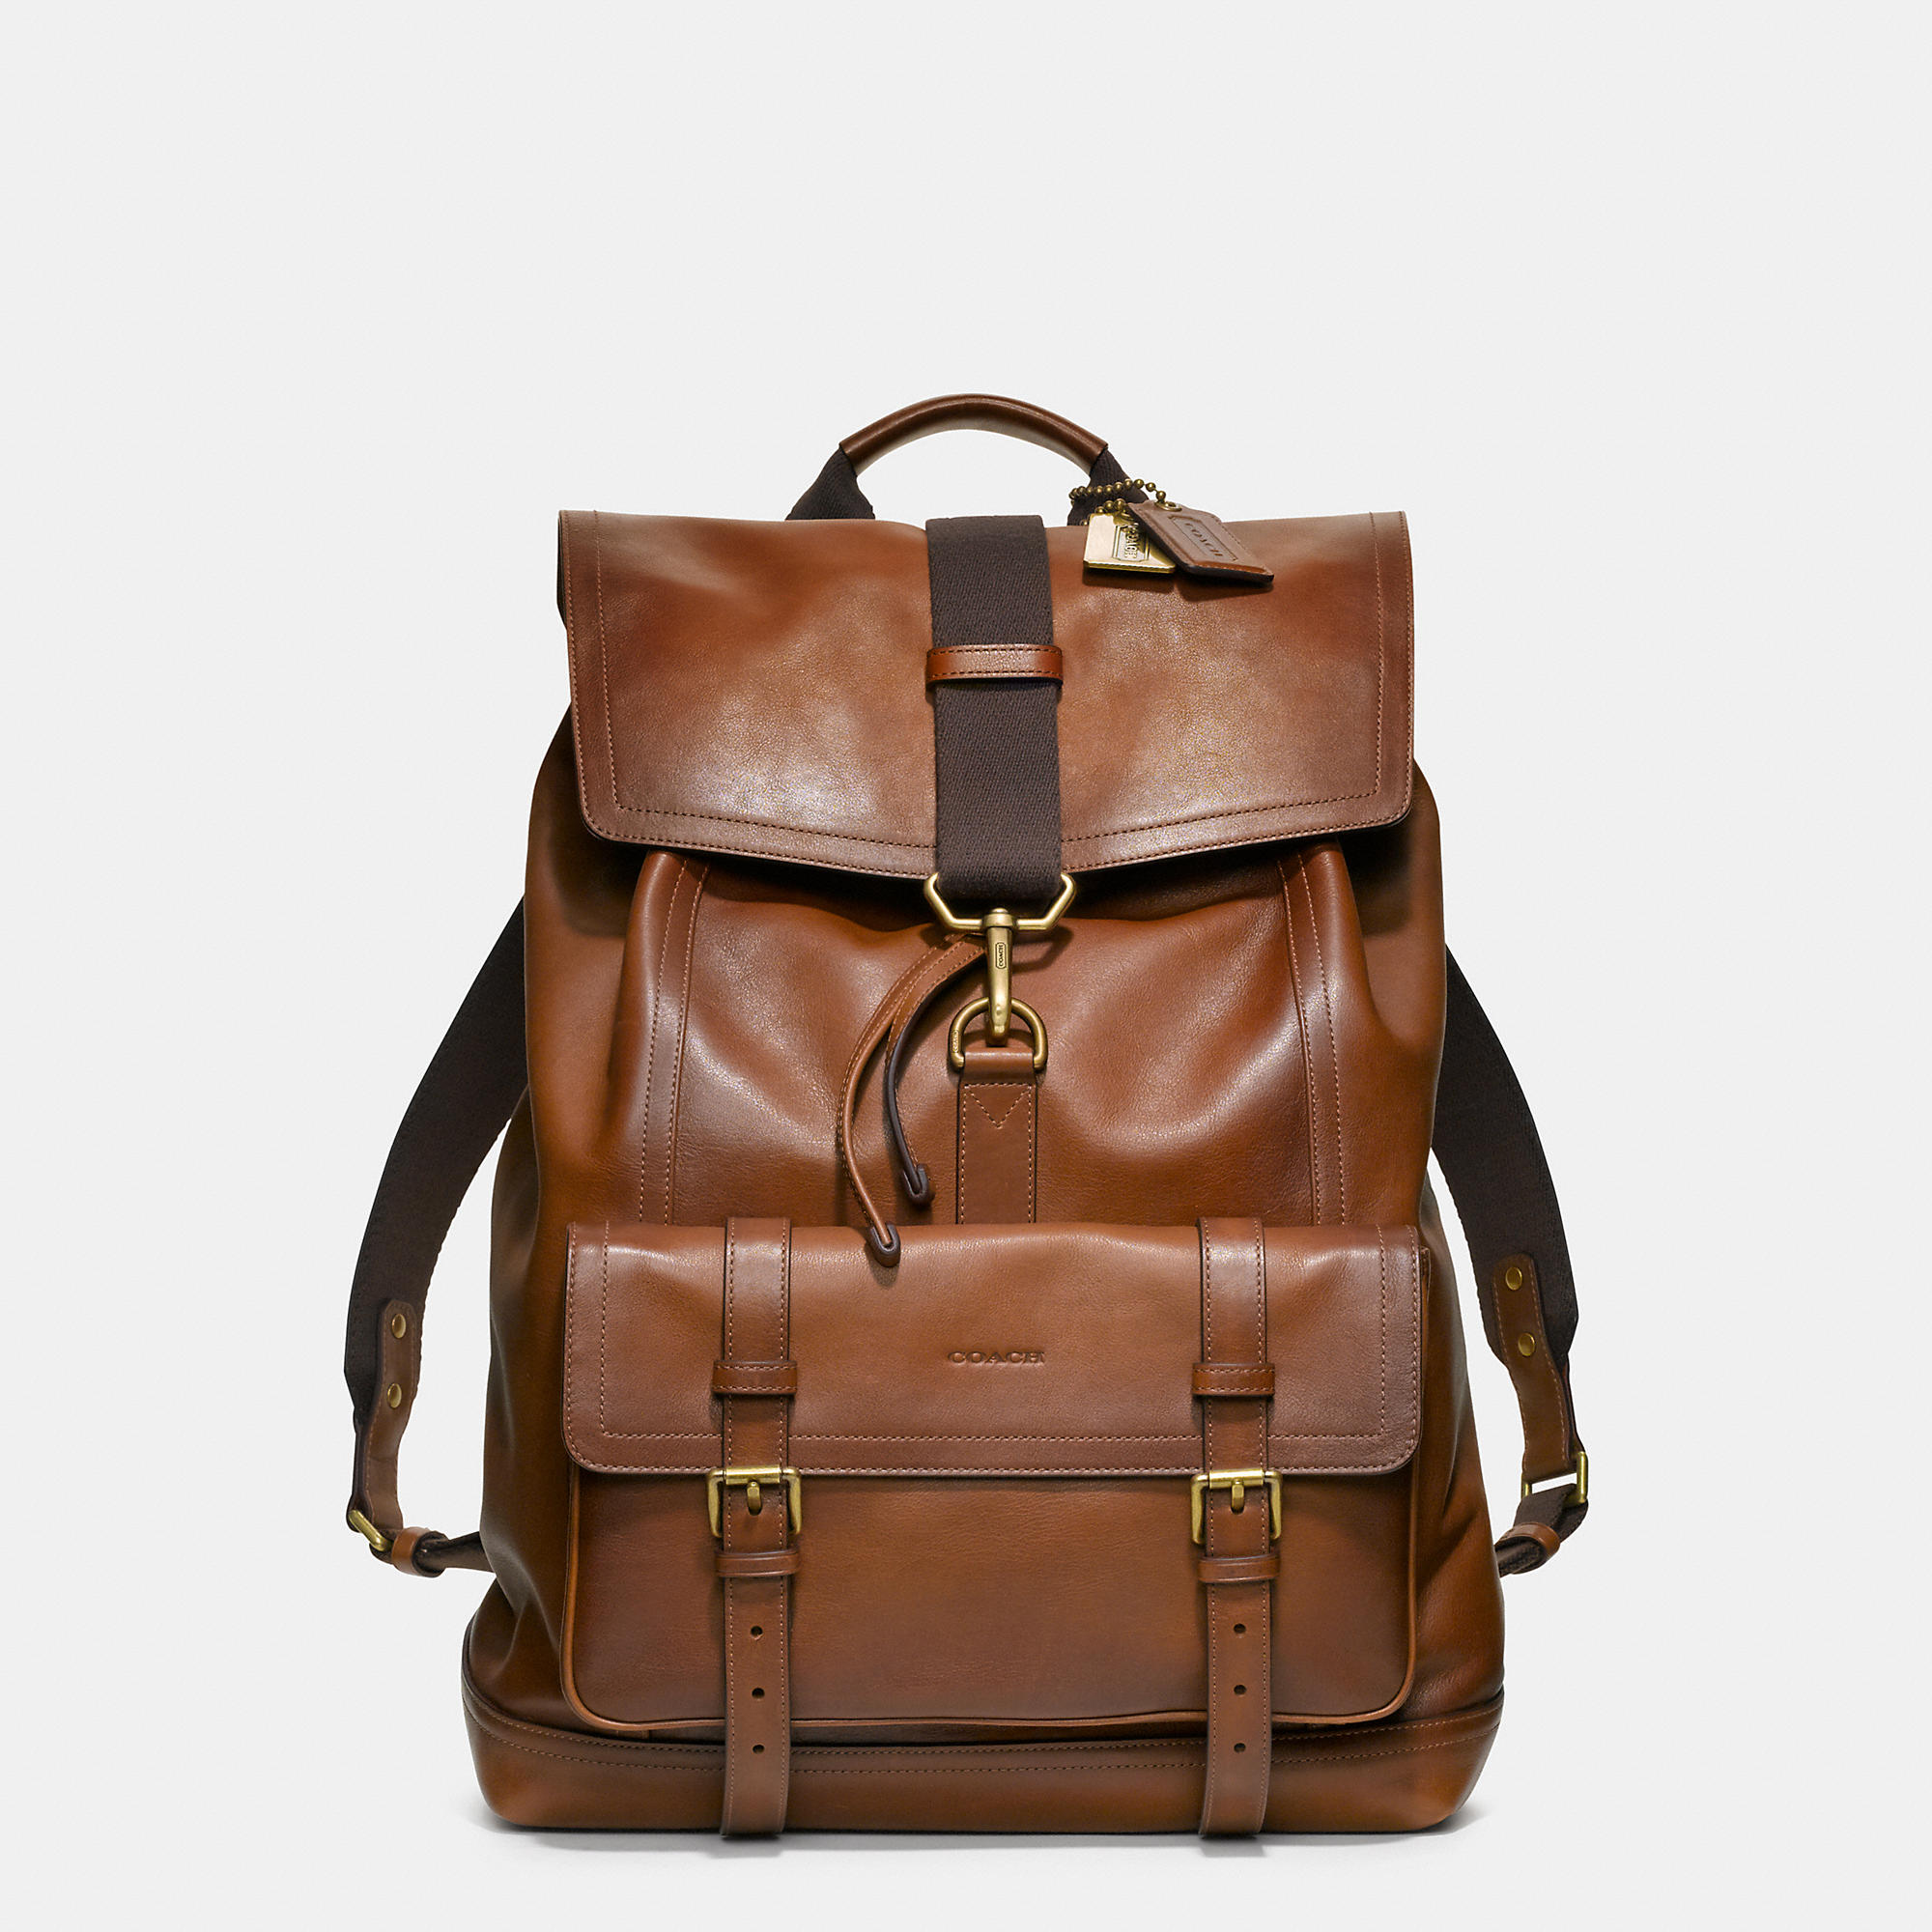 Trendy Backpacks | Fashion Jobs in Toronto, Vancouver, Montreal and Canada | Style Nine to Five